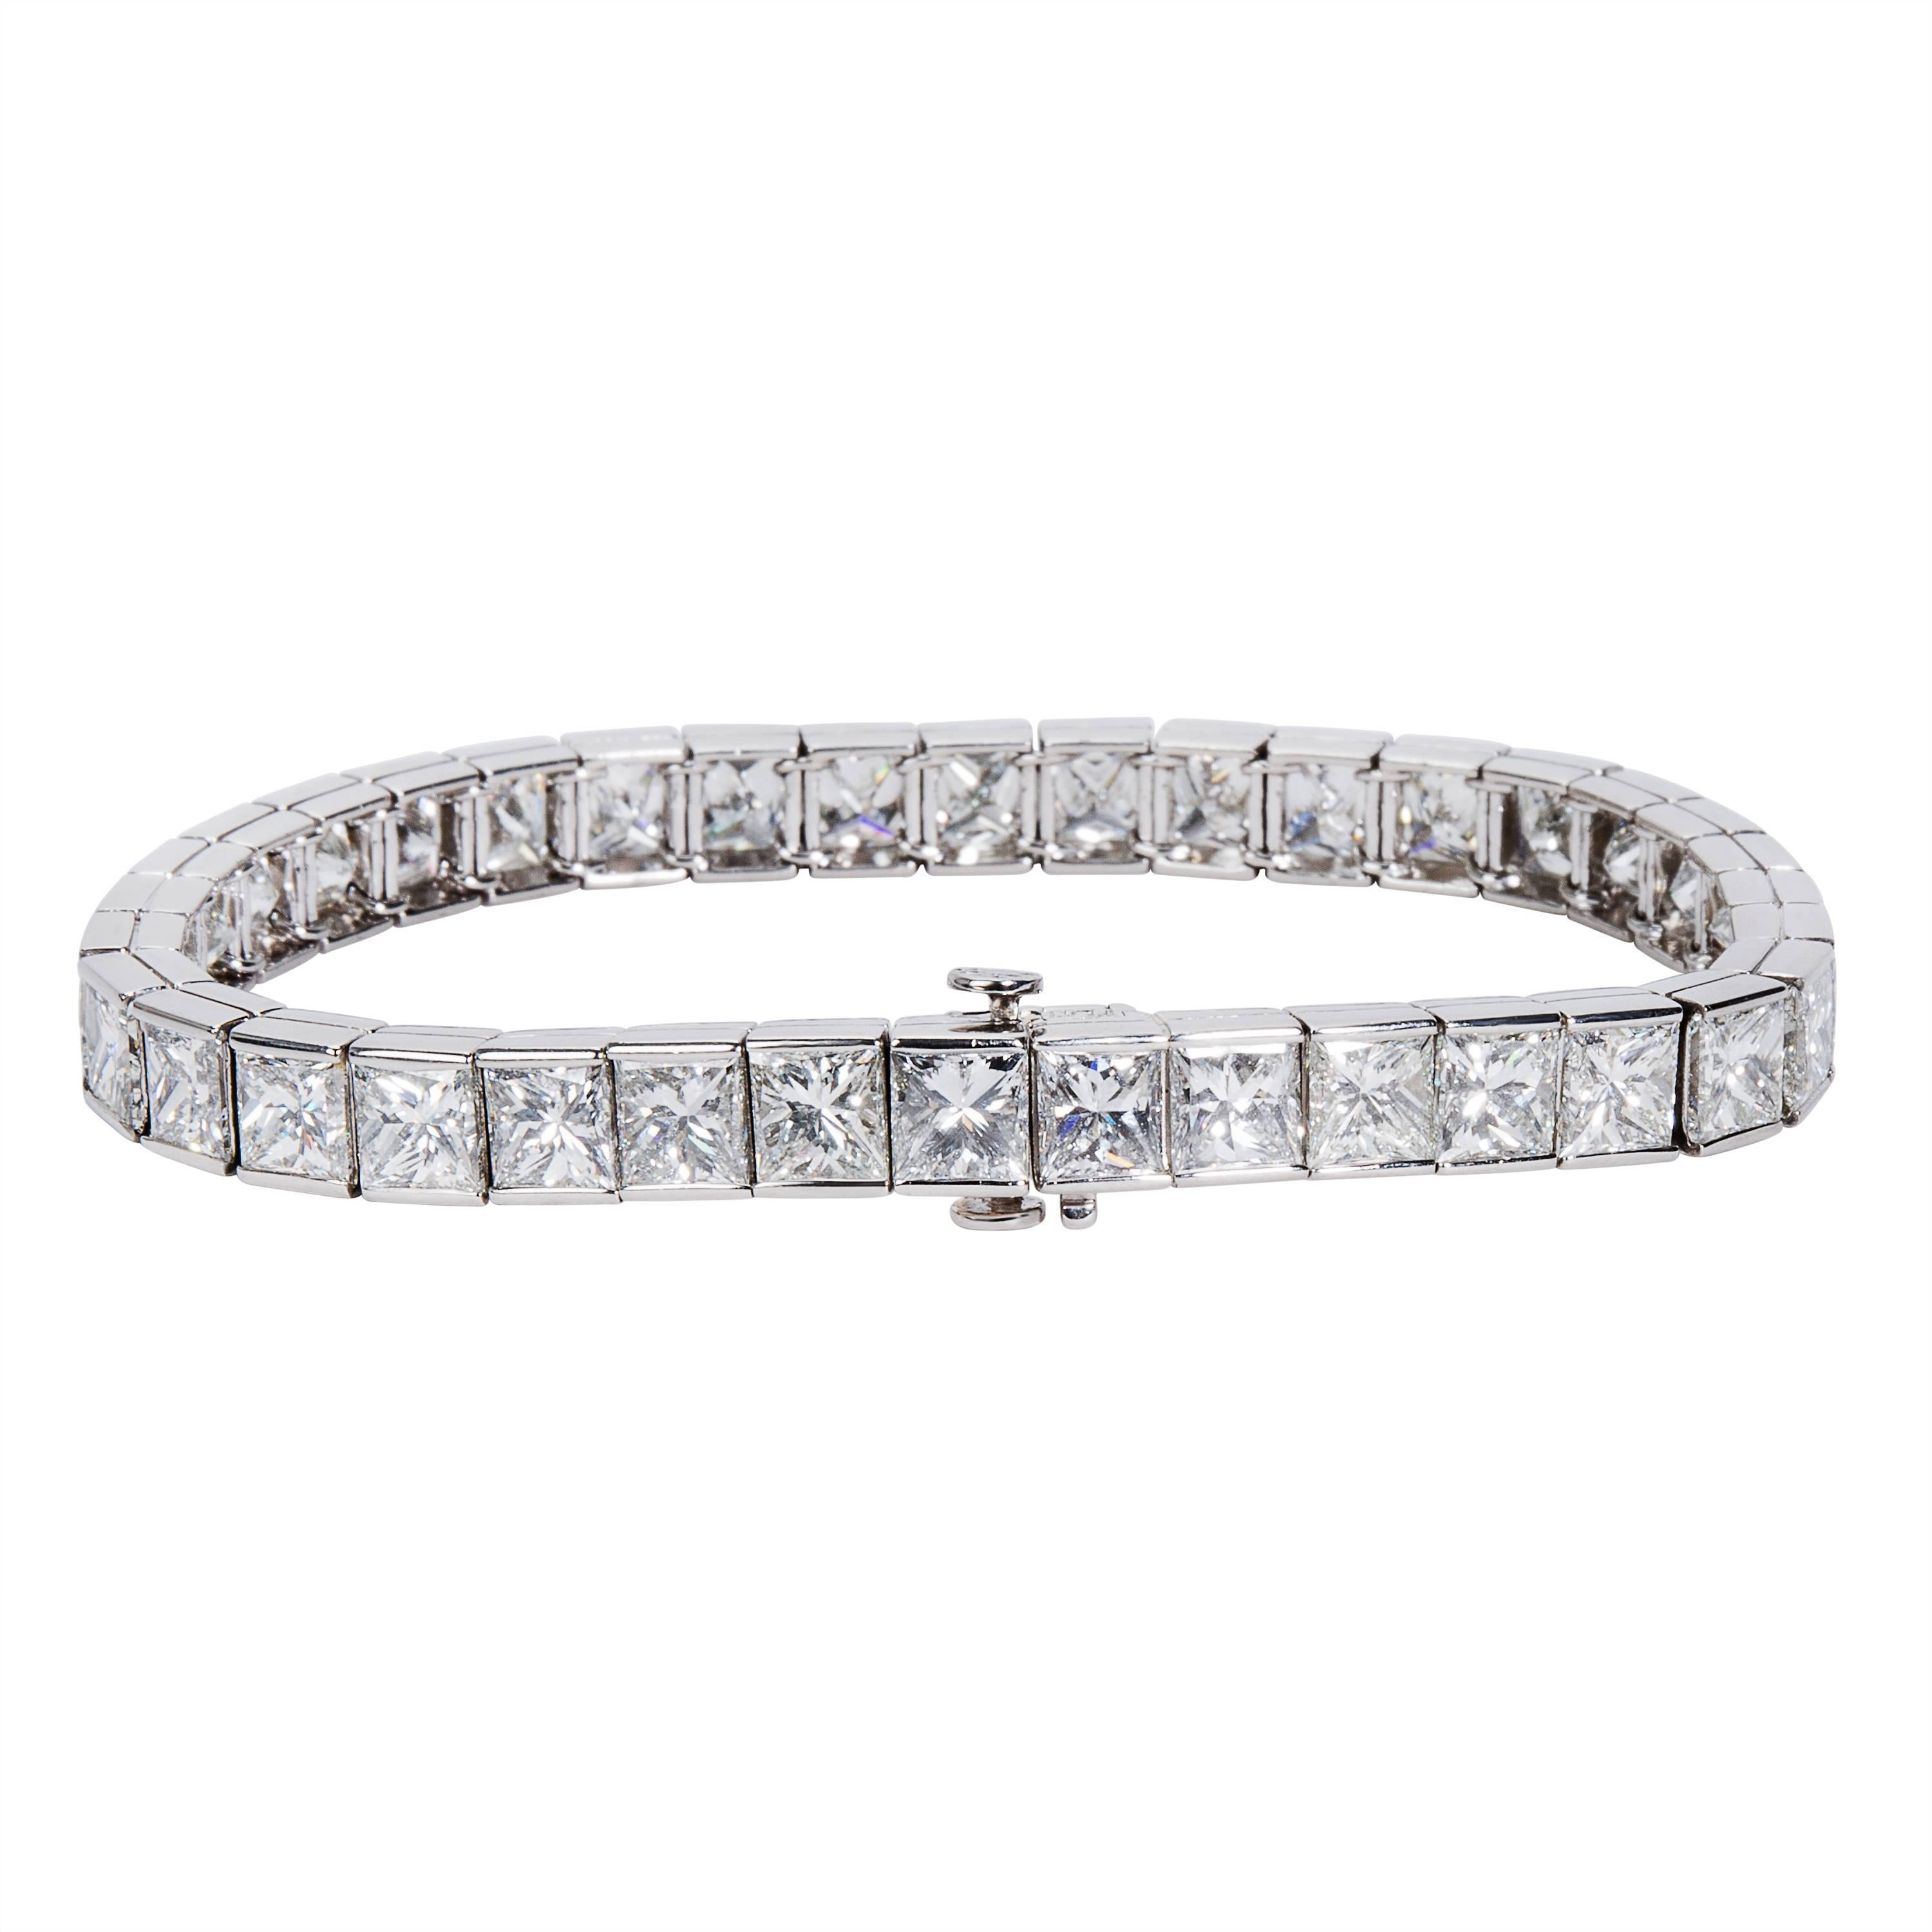 Over 24 carats of glistening diamonds create this classic and sophisticated Kwiat piece. The single, and clean row of diamonds make for a stunning look, perfect for everyday wear or a gorgeous accent piece.

This Kwiat bracelet is pre-owned and is